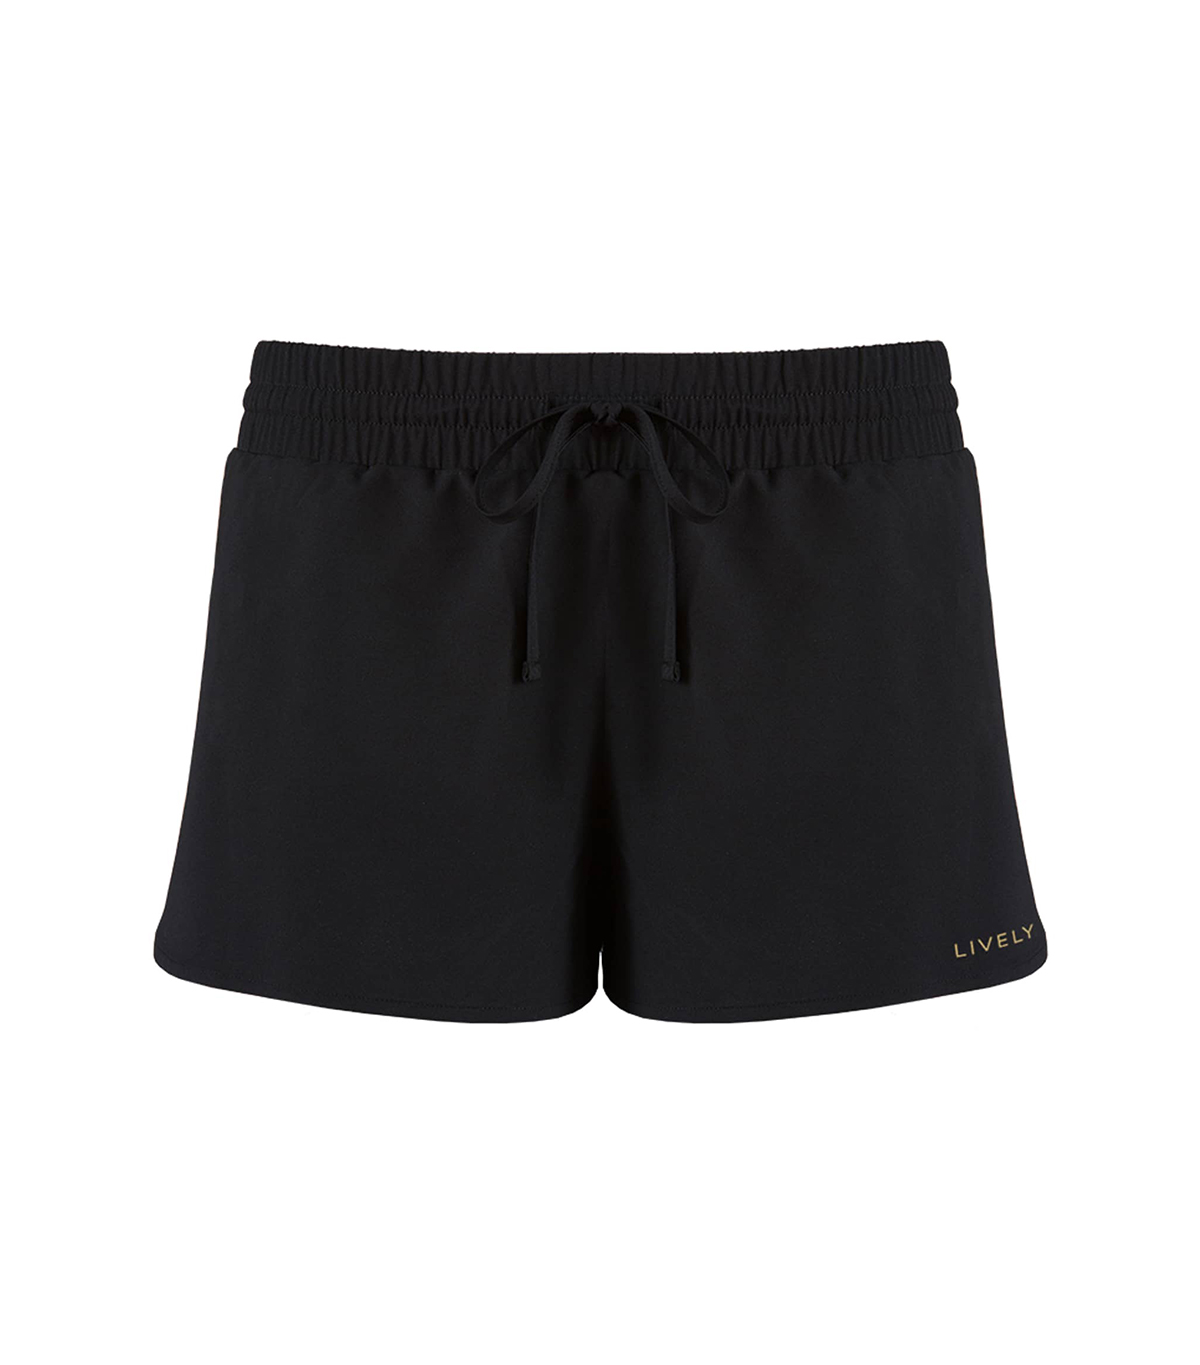 How to Style Track Shorts | Who What Wear